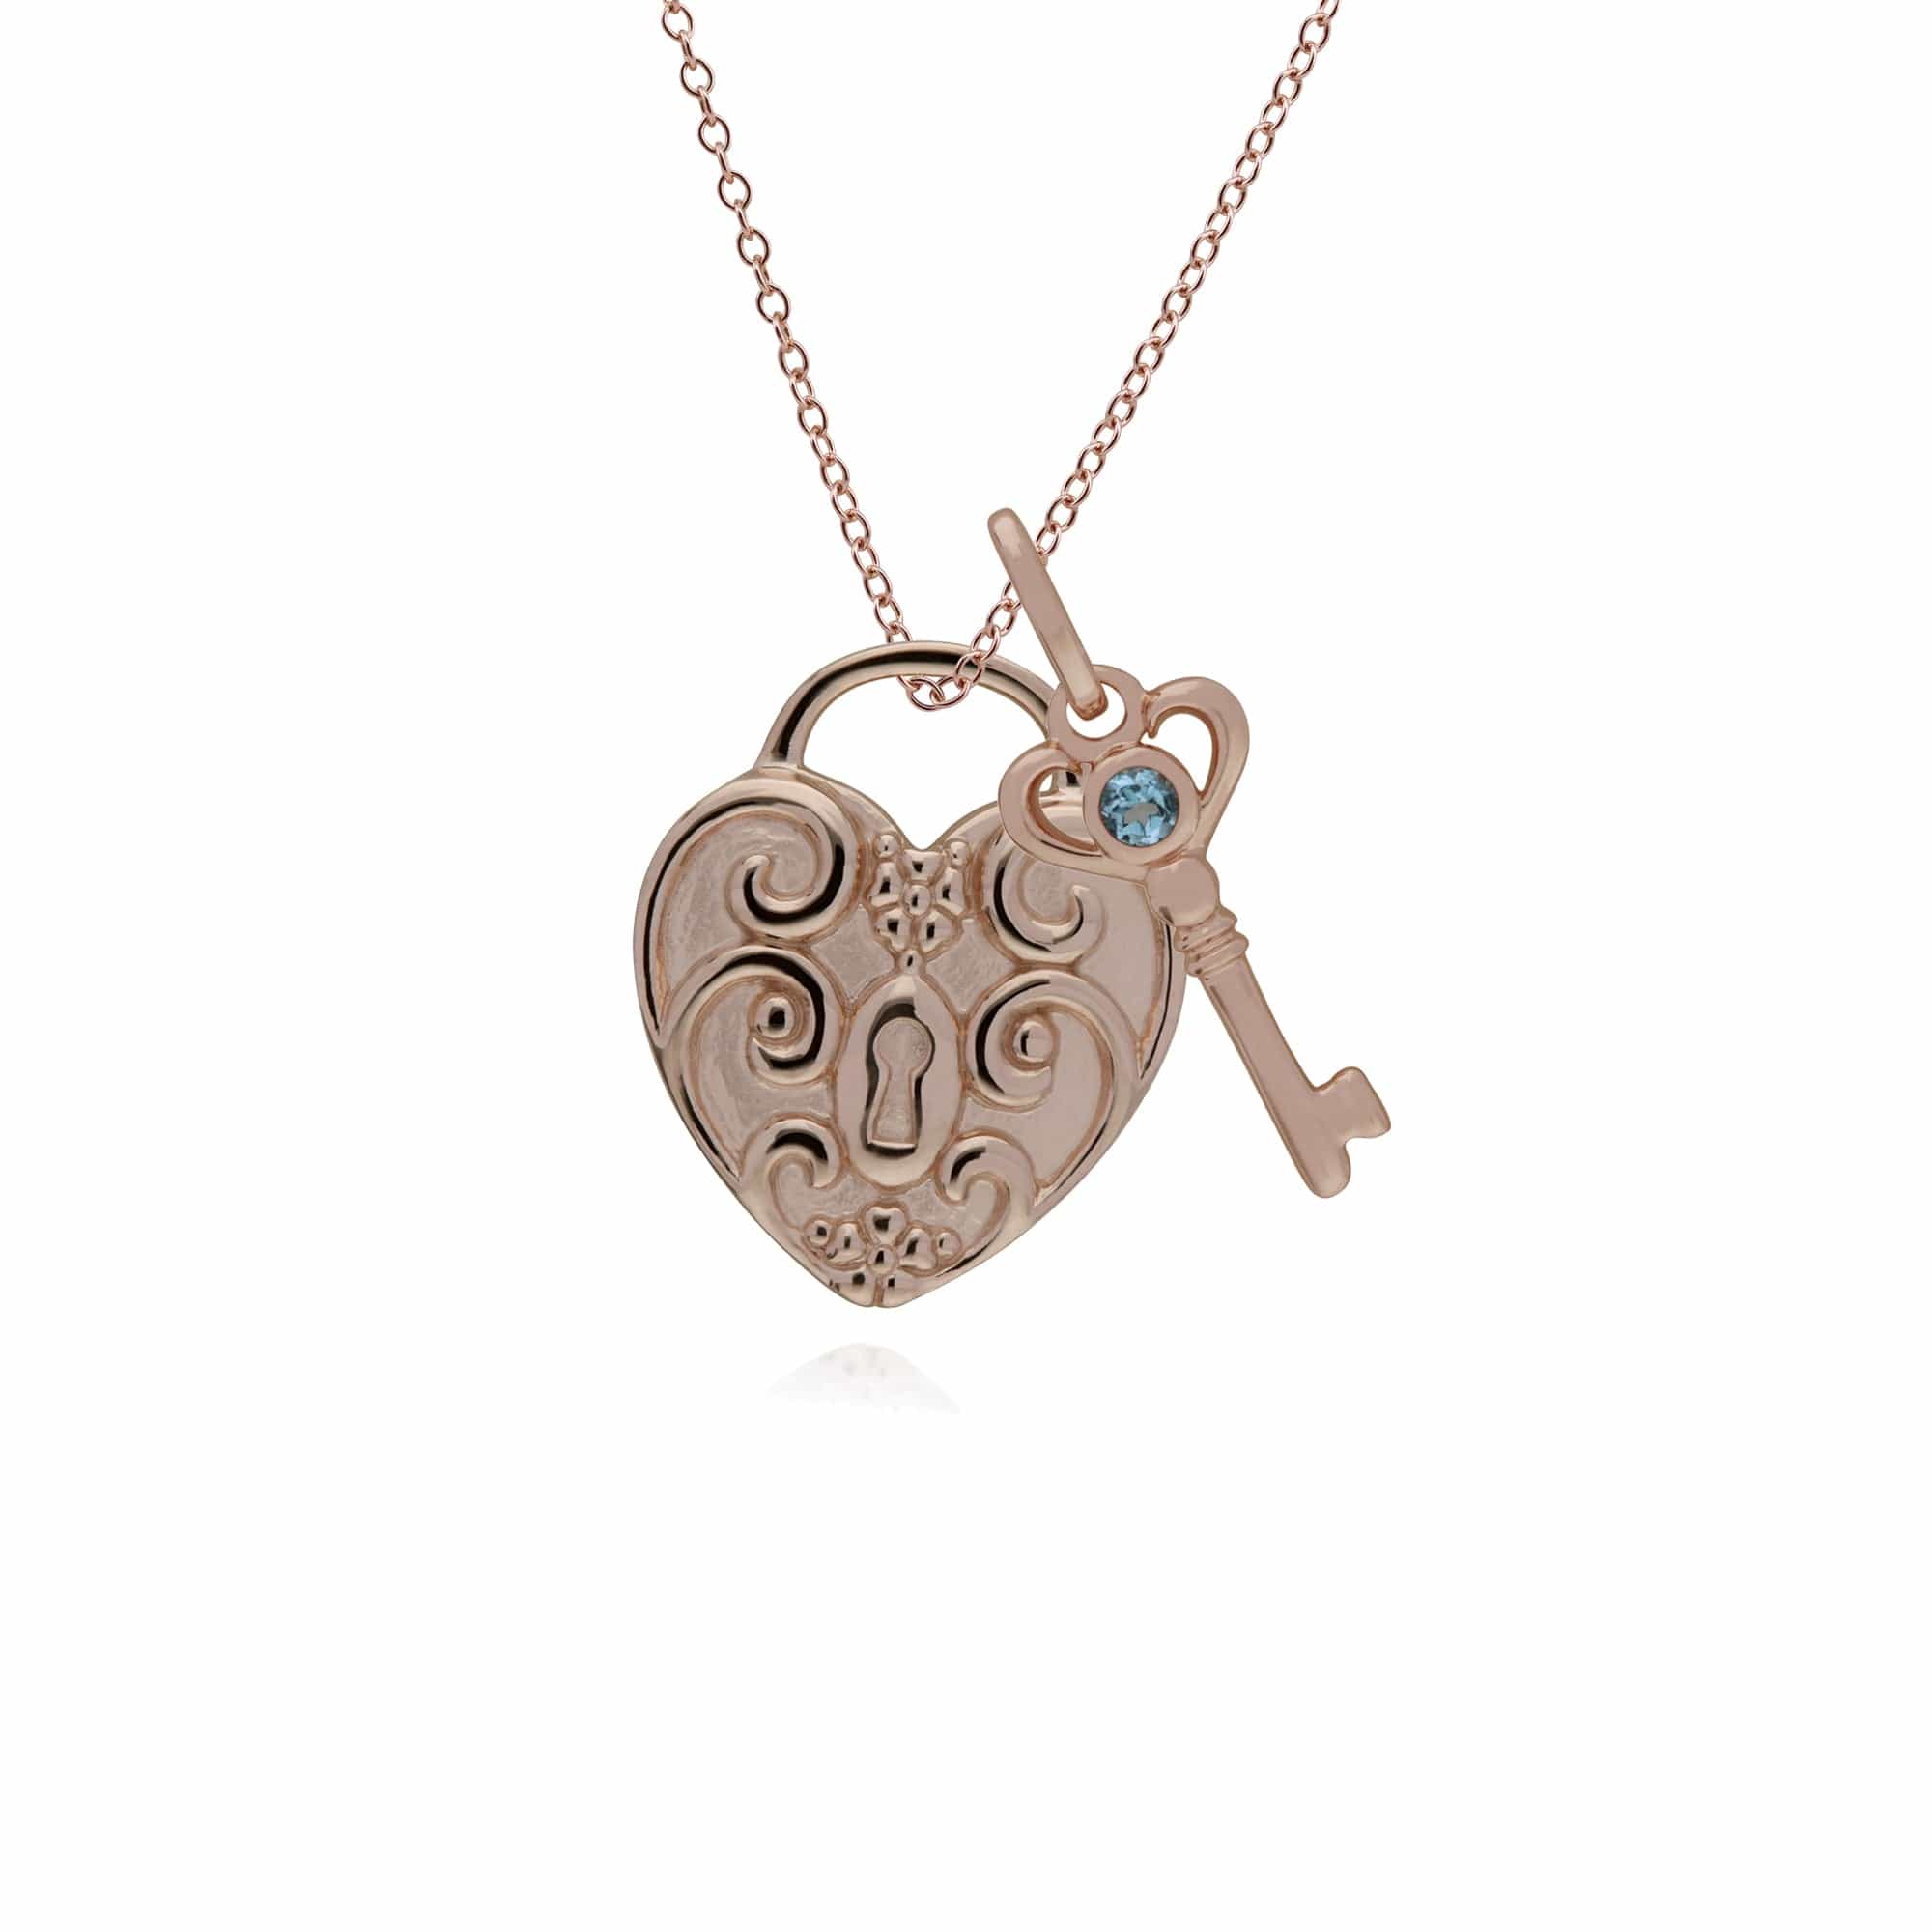 270P026305925-270P026501925 Classic Swirl Heart Lock Pendant & Blue Topaz Key Charm in Rose Gold Plated 925 Sterling Silver 1